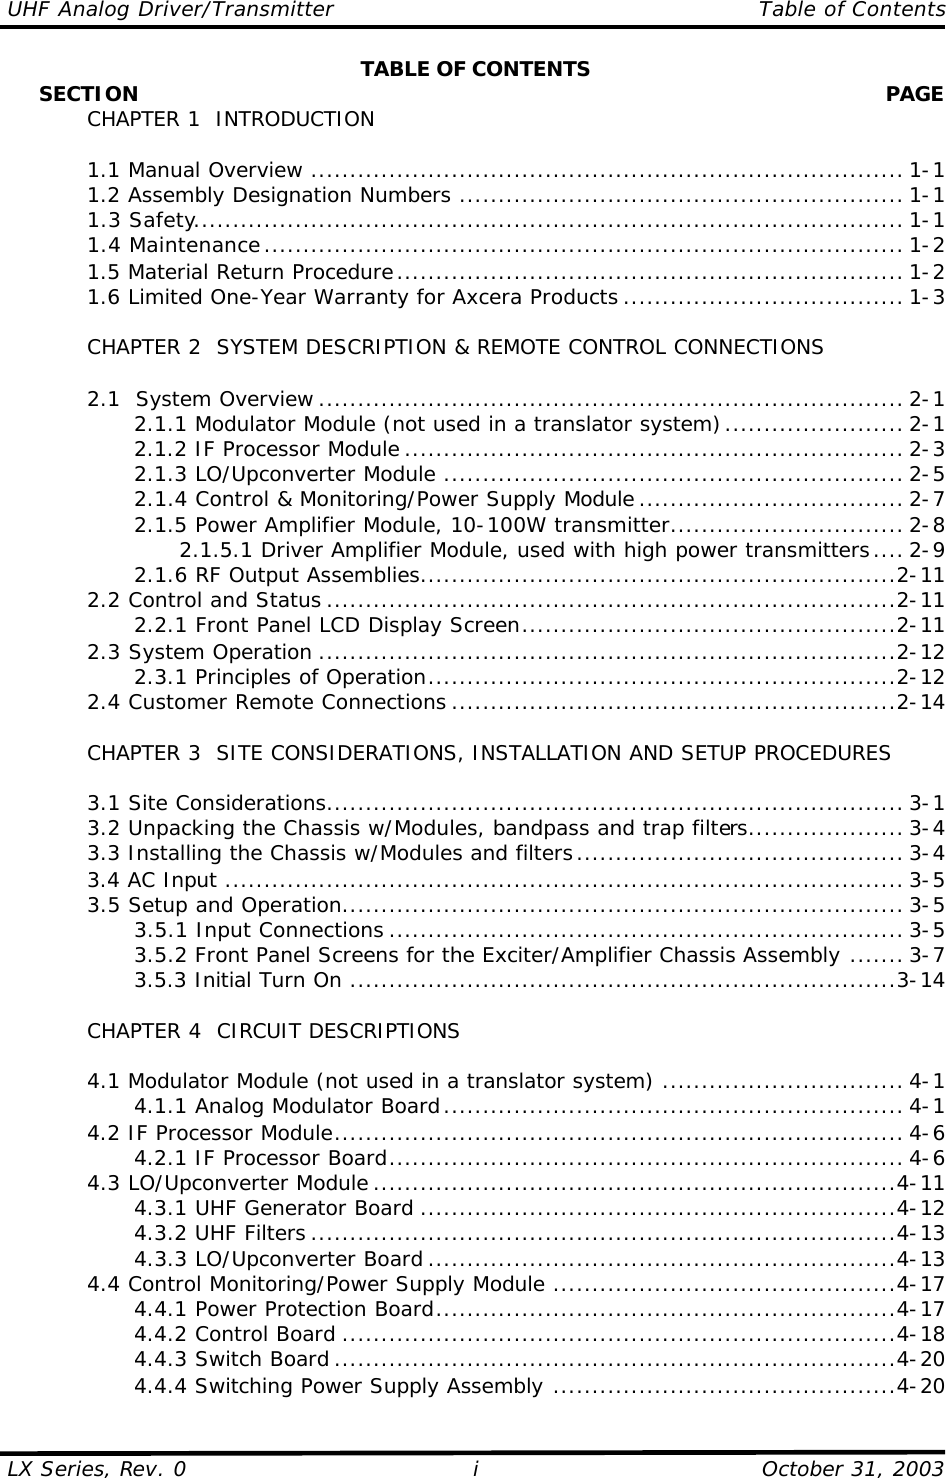 UHF Analog Driver/Transmitter    Table of Contents  LX Series, Rev. 0    October 31, 2003 i TABLE OF CONTENTS      SECTION    PAGE  CHAPTER 1  INTRODUCTION   1.1 Manual Overview ............................................................................ 1-1  1.2 Assembly Designation Numbers ......................................................... 1-1  1.3 Safety........................................................................................... 1-1  1.4 Maintenance.................................................................................. 1-2  1.5 Material Return Procedure................................................................. 1-2  1.6 Limited One-Year Warranty for Axcera Products .................................... 1-3   CHAPTER 2  SYSTEM DESCRIPTION &amp; REMOTE CONTROL CONNECTIONS   2.1  System Overview ........................................................................... 2-1     2.1.1 Modulator Module (not used in a translator system)....................... 2-1     2.1.2 IF Processor Module ................................................................ 2-3     2.1.3 LO/Upconverter Module ........................................................... 2-5     2.1.4 Control &amp; Monitoring/Power Supply Module .................................. 2-7     2.1.5 Power Amplifier Module, 10-100W transmitter.............................. 2-8       2.1.5.1 Driver Amplifier Module, used with high power transmitters.... 2-9     2.1.6 RF Output Assemblies.............................................................2-11  2.2 Control and Status .........................................................................2-11     2.2.1 Front Panel LCD Display Screen................................................2-11  2.3 System Operation ..........................................................................2-12     2.3.1 Principles of Operation............................................................2-12  2.4 Customer Remote Connections .........................................................2-14       CHAPTER 3  SITE CONSIDERATIONS, INSTALLATION AND SETUP PROCEDURES     3.1 Site Considerations.......................................................................... 3-1  3.2 Unpacking the Chassis w/Modules, bandpass and trap filters.................... 3-4  3.3 Installing the Chassis w/Modules and filters.......................................... 3-4  3.4 AC Input ....................................................................................... 3-5  3.5 Setup and Operation........................................................................ 3-5     3.5.1 Input Connections .................................................................. 3-5     3.5.2 Front Panel Screens for the Exciter/Amplifier Chassis Assembly ....... 3-7     3.5.3 Initial Turn On ......................................................................3-14   CHAPTER 4  CIRCUIT DESCRIPTIONS   4.1 Modulator Module (not used in a translator system) ............................... 4-1     4.1.1 Analog Modulator Board........................................................... 4-1  4.2 IF Processor Module......................................................................... 4-6     4.2.1 IF Processor Board.................................................................. 4-6  4.3 LO/Upconverter Module ...................................................................4-11     4.3.1 UHF Generator Board .............................................................4-12     4.3.2 UHF Filters ...........................................................................4-13     4.3.3 LO/Upconverter Board ............................................................4-13  4.4 Control Monitoring/Power Supply Module ............................................4-17     4.4.1 Power Protection Board...........................................................4-17     4.4.2 Control Board .......................................................................4-18     4.4.3 Switch Board ........................................................................4-20     4.4.4 Switching Power Supply Assembly ............................................4-20 